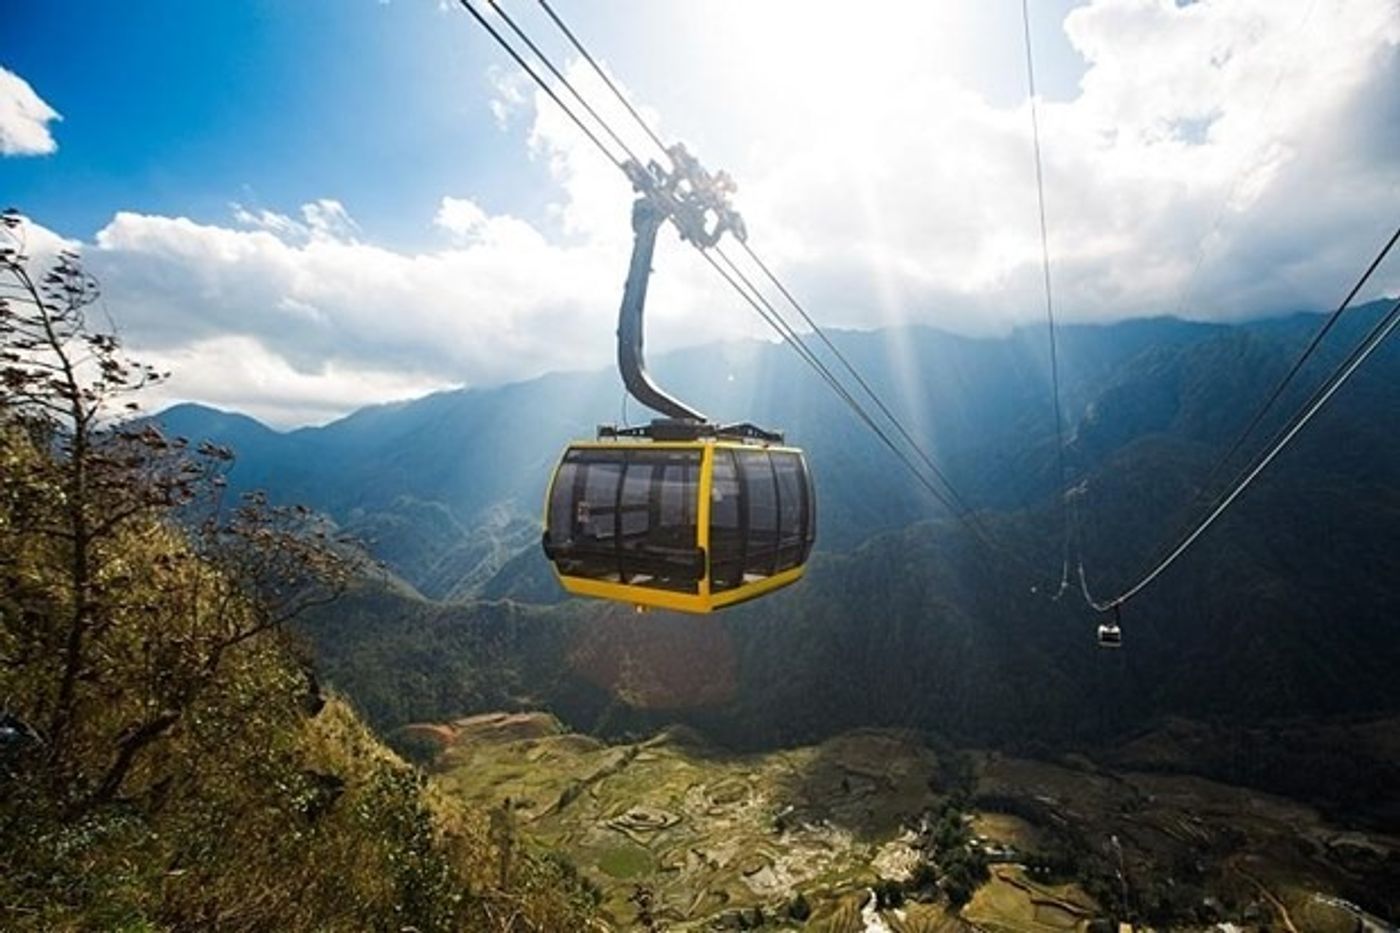 The cable car system to Mount Fansipan in the midst of the cloud sea.